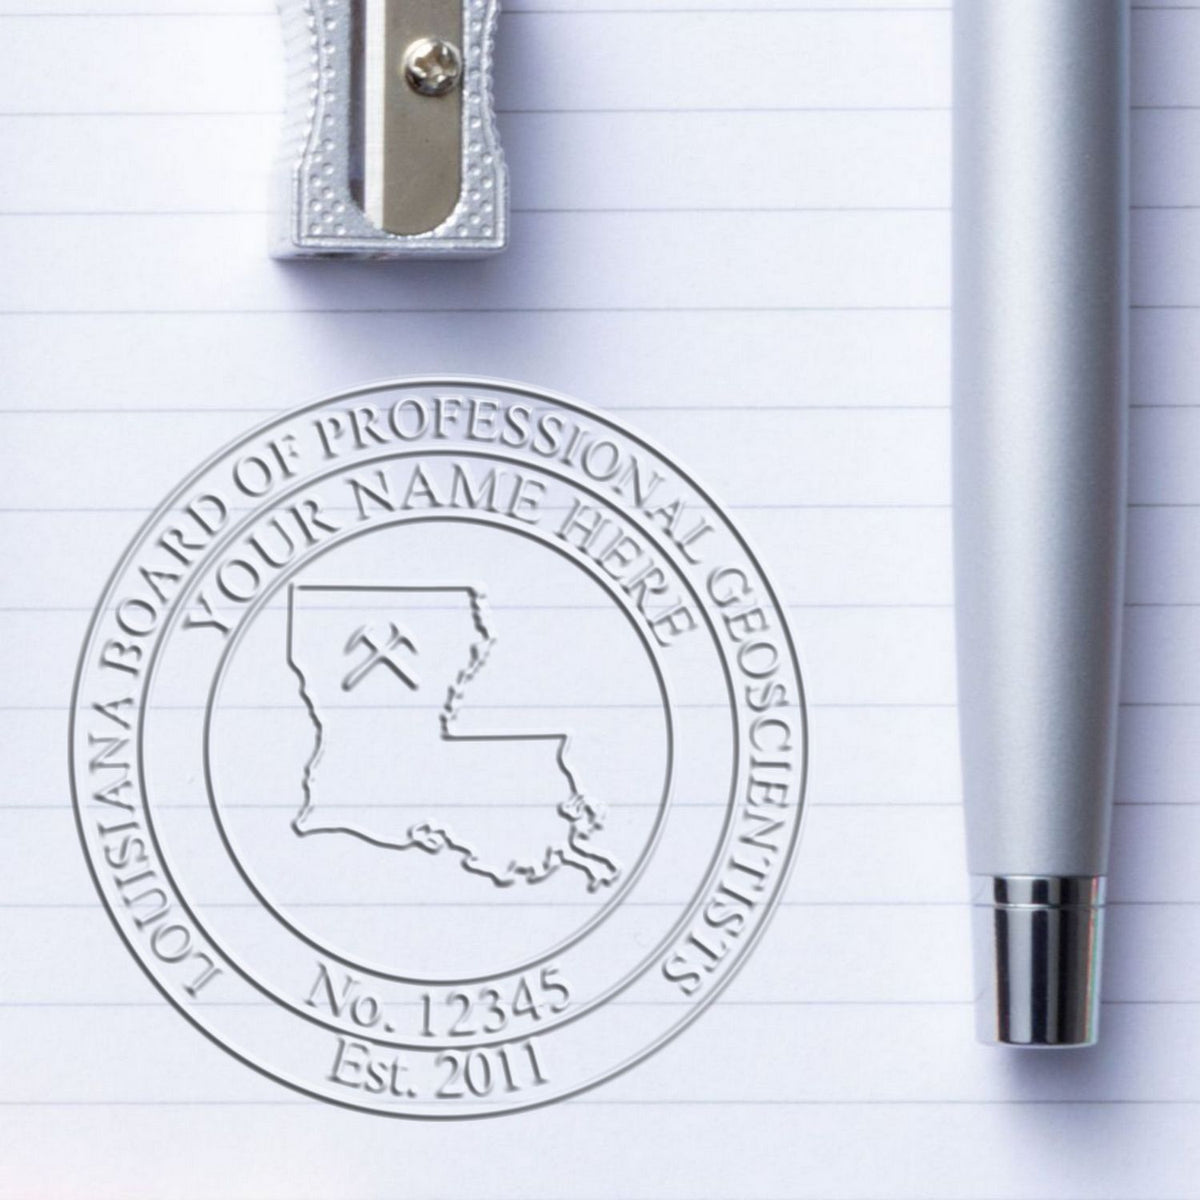 A stamped imprint of the State of Louisiana Extended Long Reach Geologist Seal in this stylish lifestyle photo, setting the tone for a unique and personalized product.